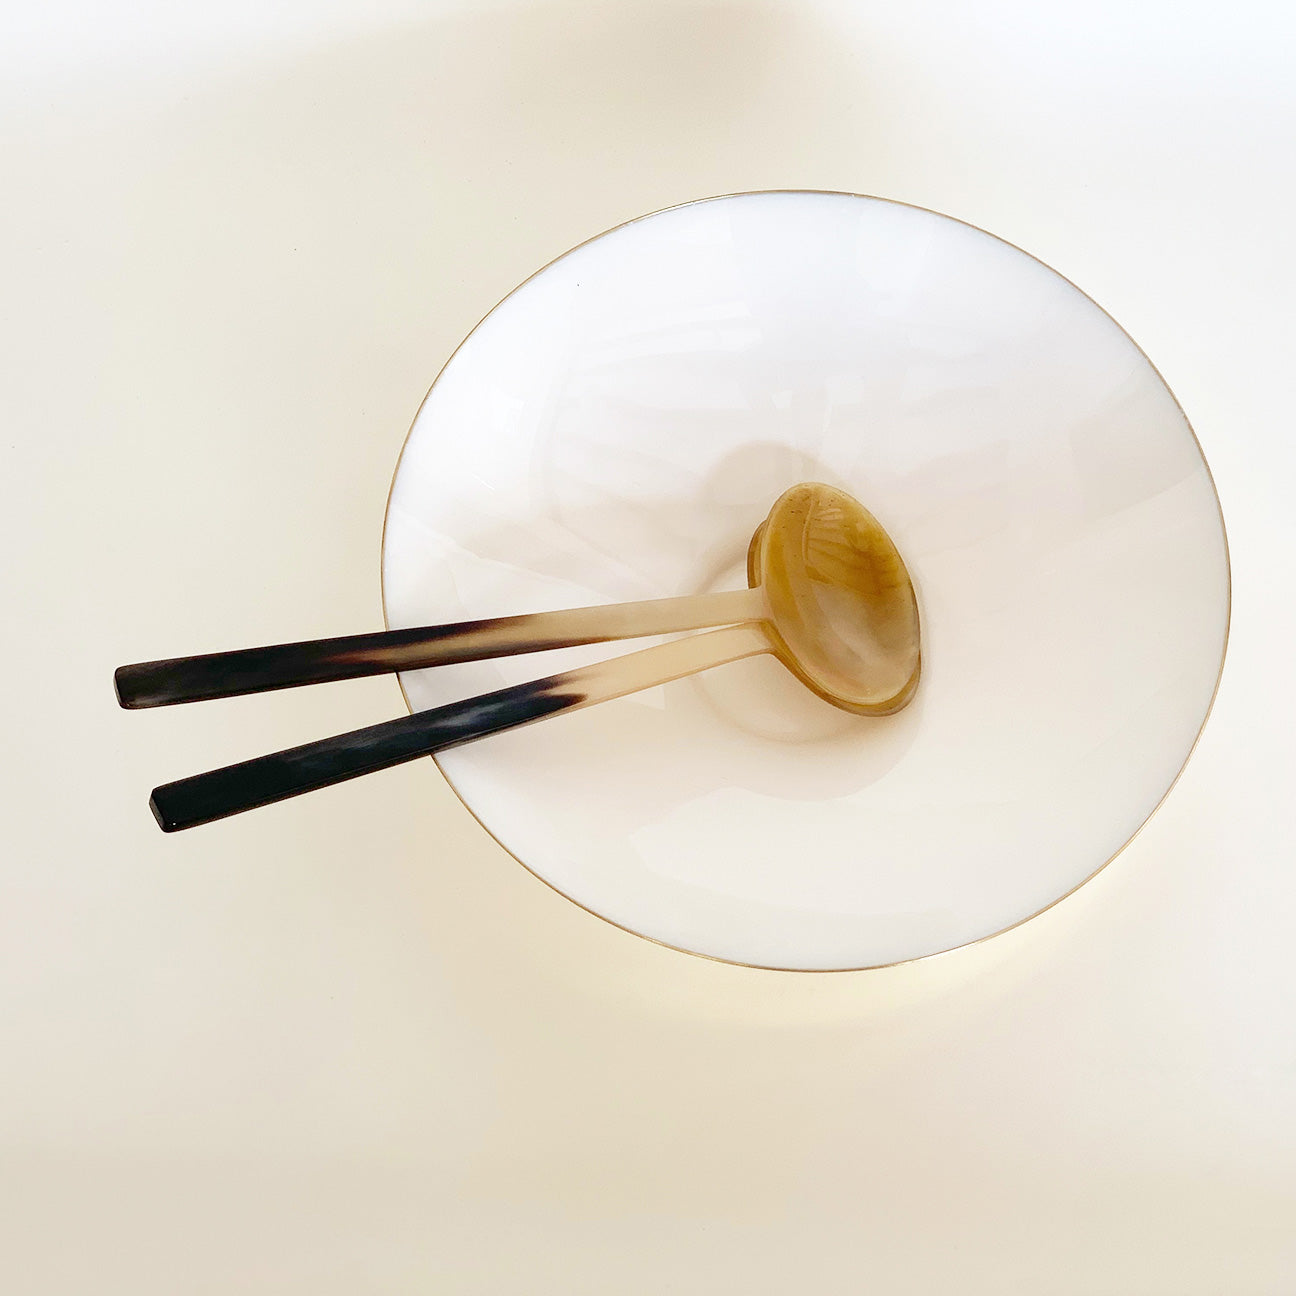 Image of a pair of M+A NYC Amber Horn Servers in a Kora Enamel Bowl